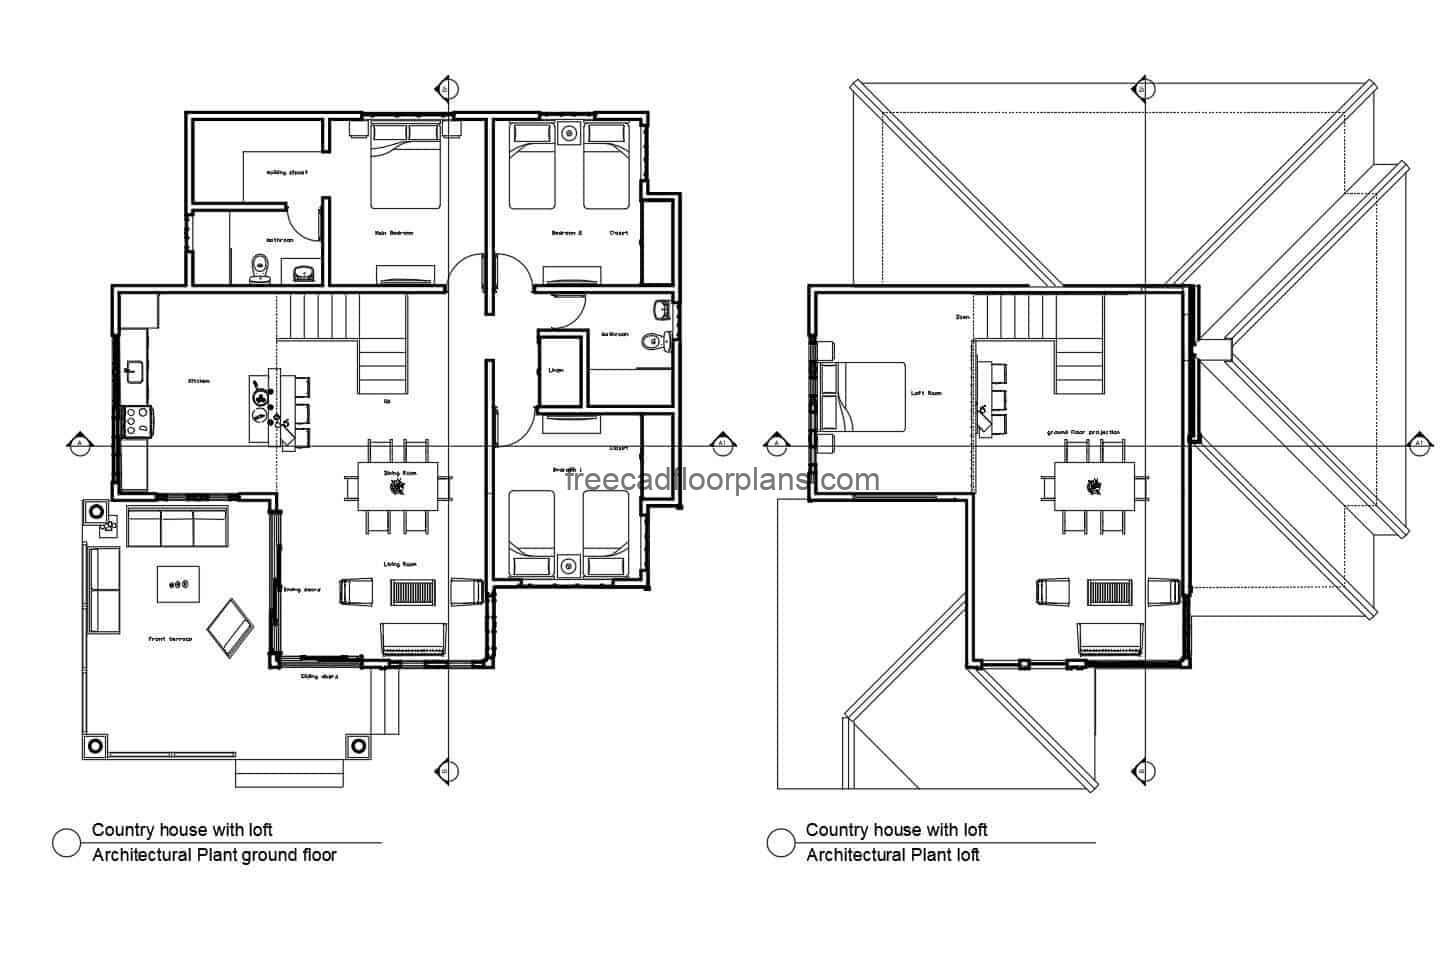 Architectural plans in autocad format for free download of a two-level country house with three bedrooms and a loft.